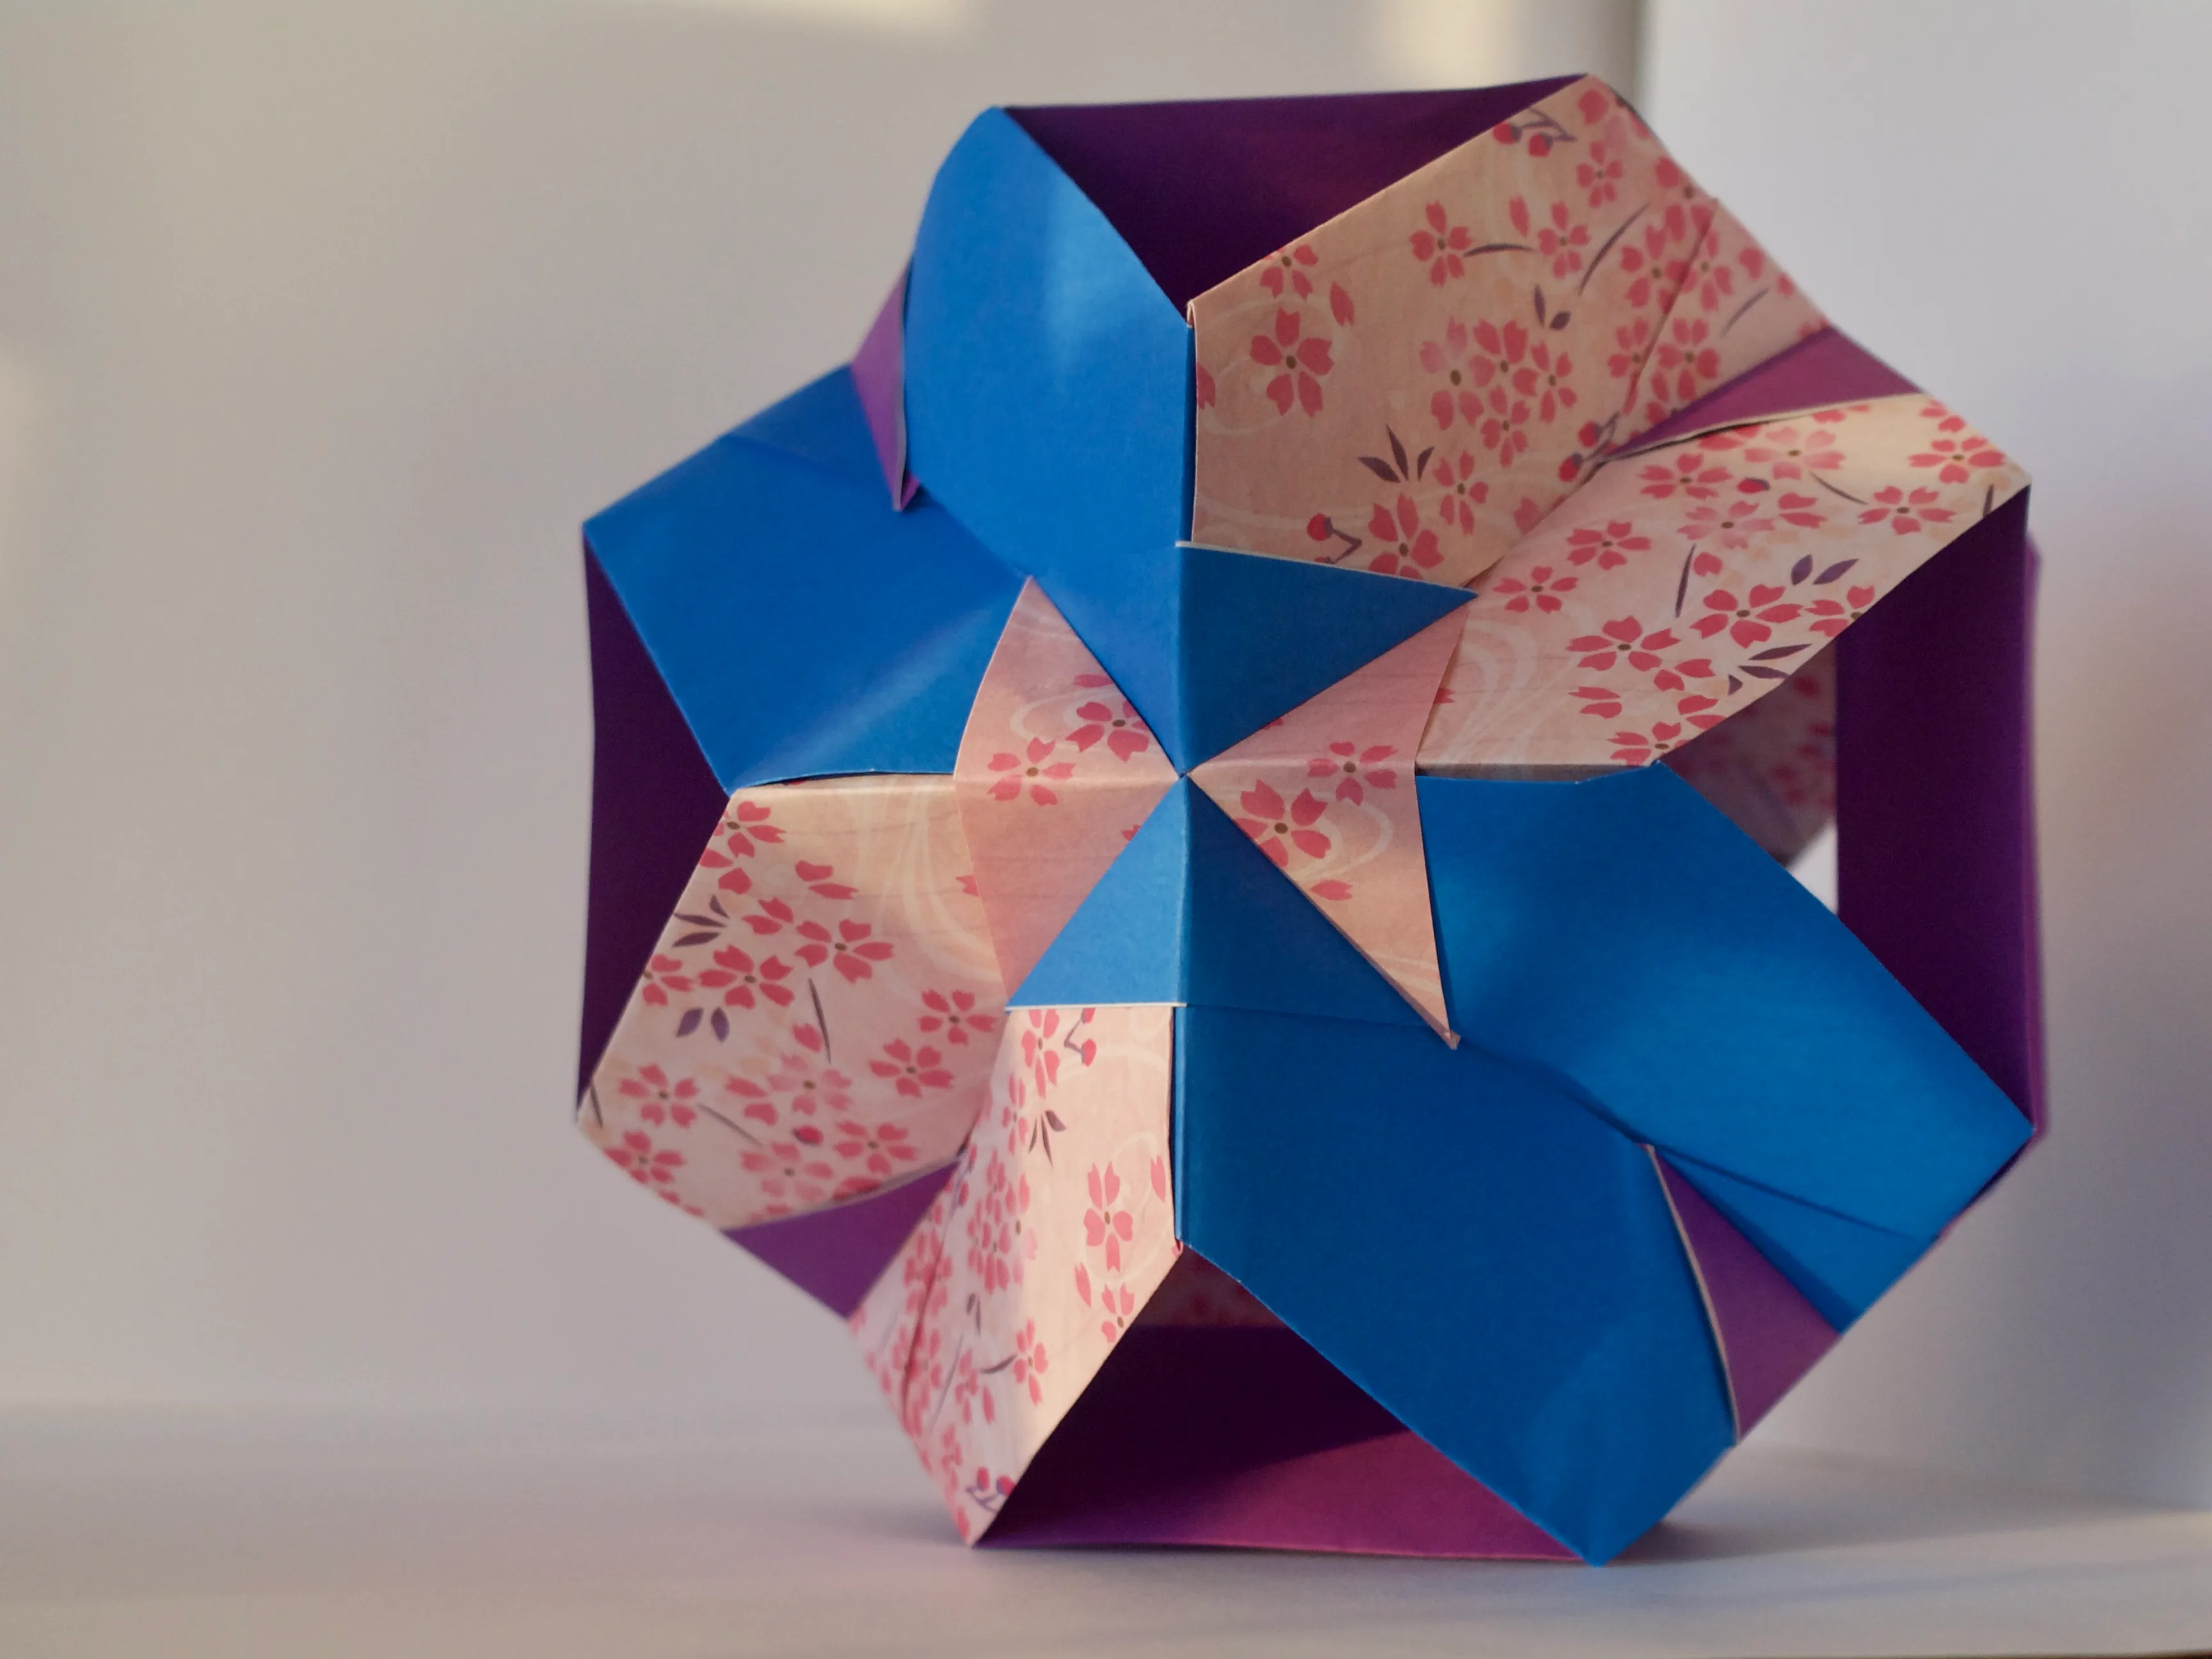 A photo of a sun-dappled moduler origami module made from blue, purple, and pink cherry blossom origami paper.